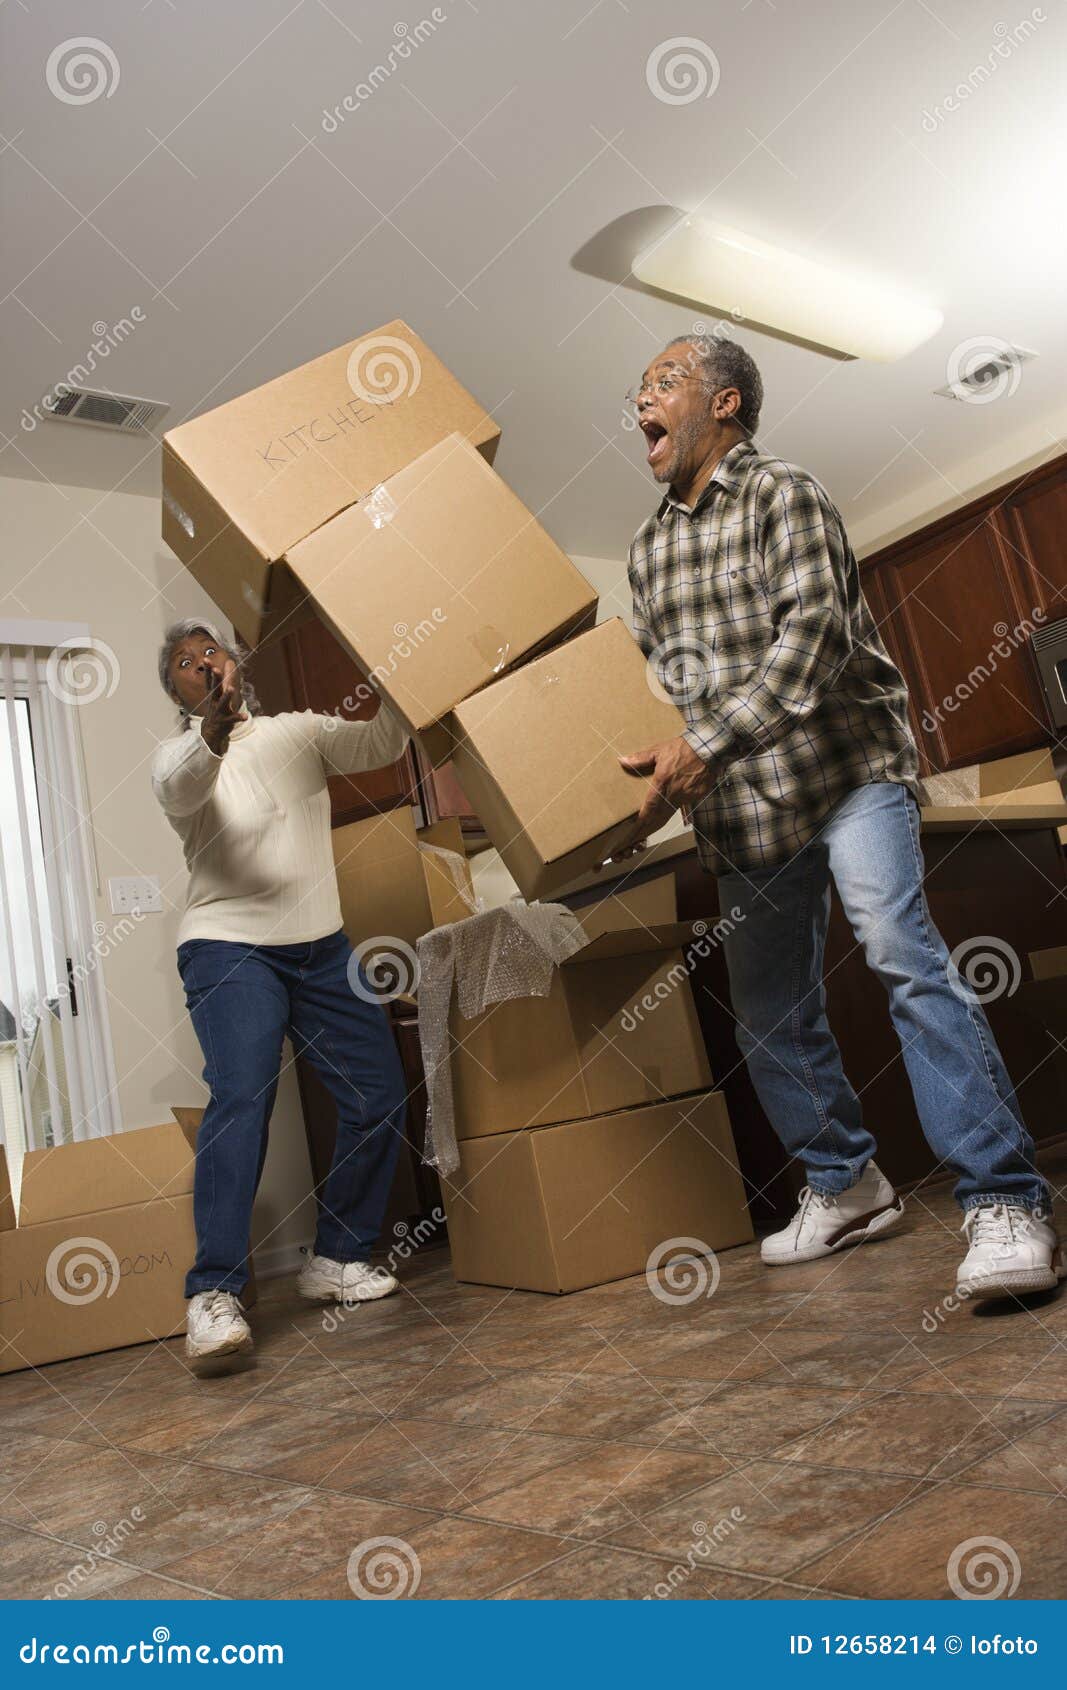 man dropping stack of boxes